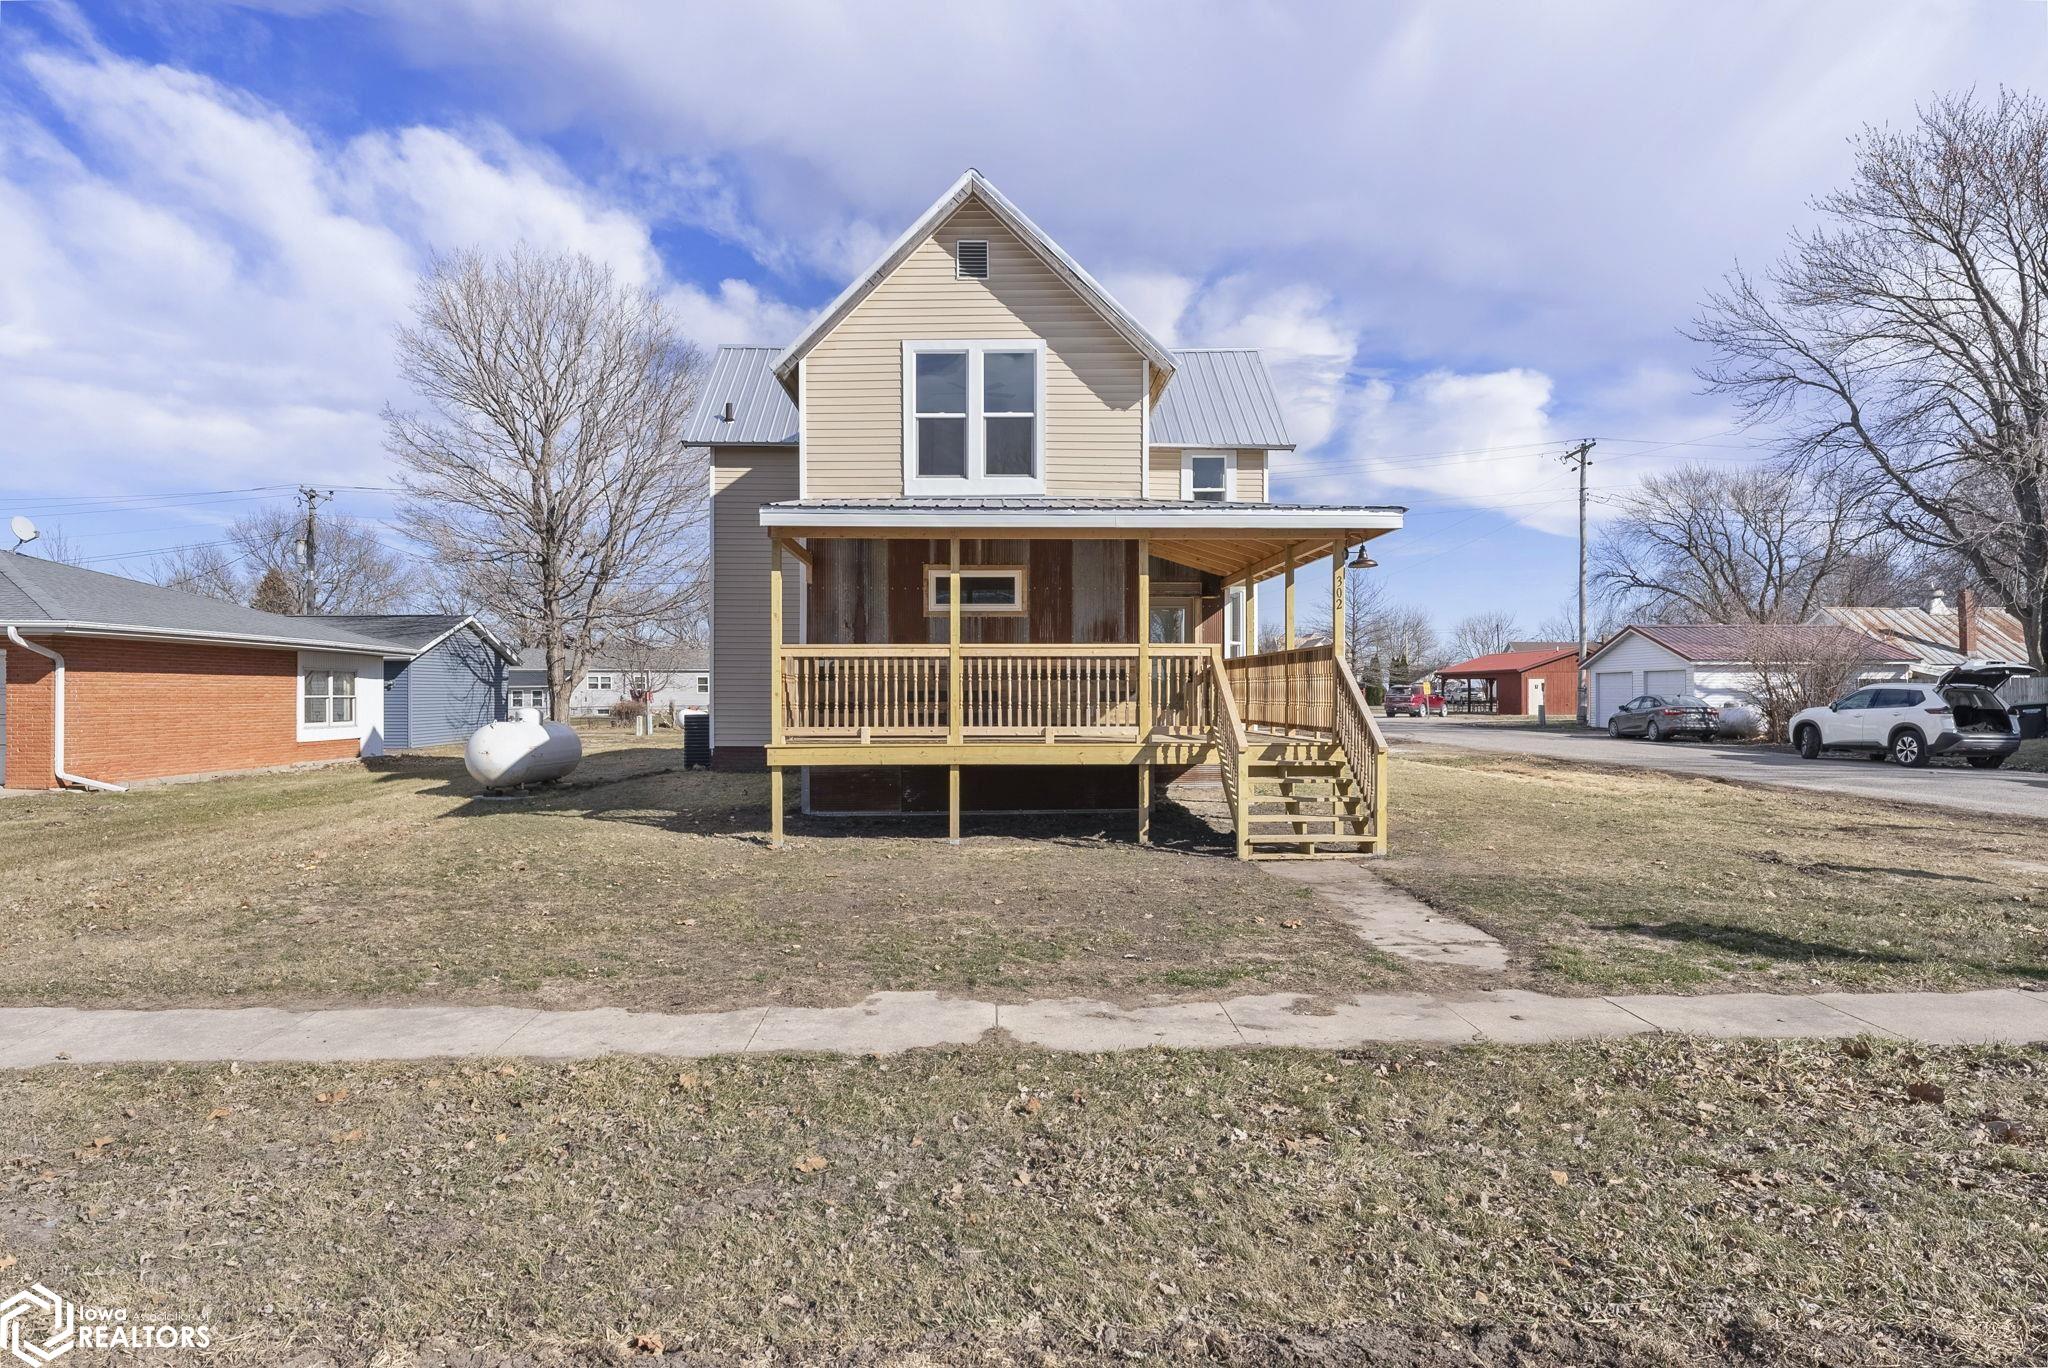 302 Main, Olds, Iowa 52647, 4 Bedrooms Bedrooms, ,2 BathroomsBathrooms,Single Family,For Sale,Main,6316252